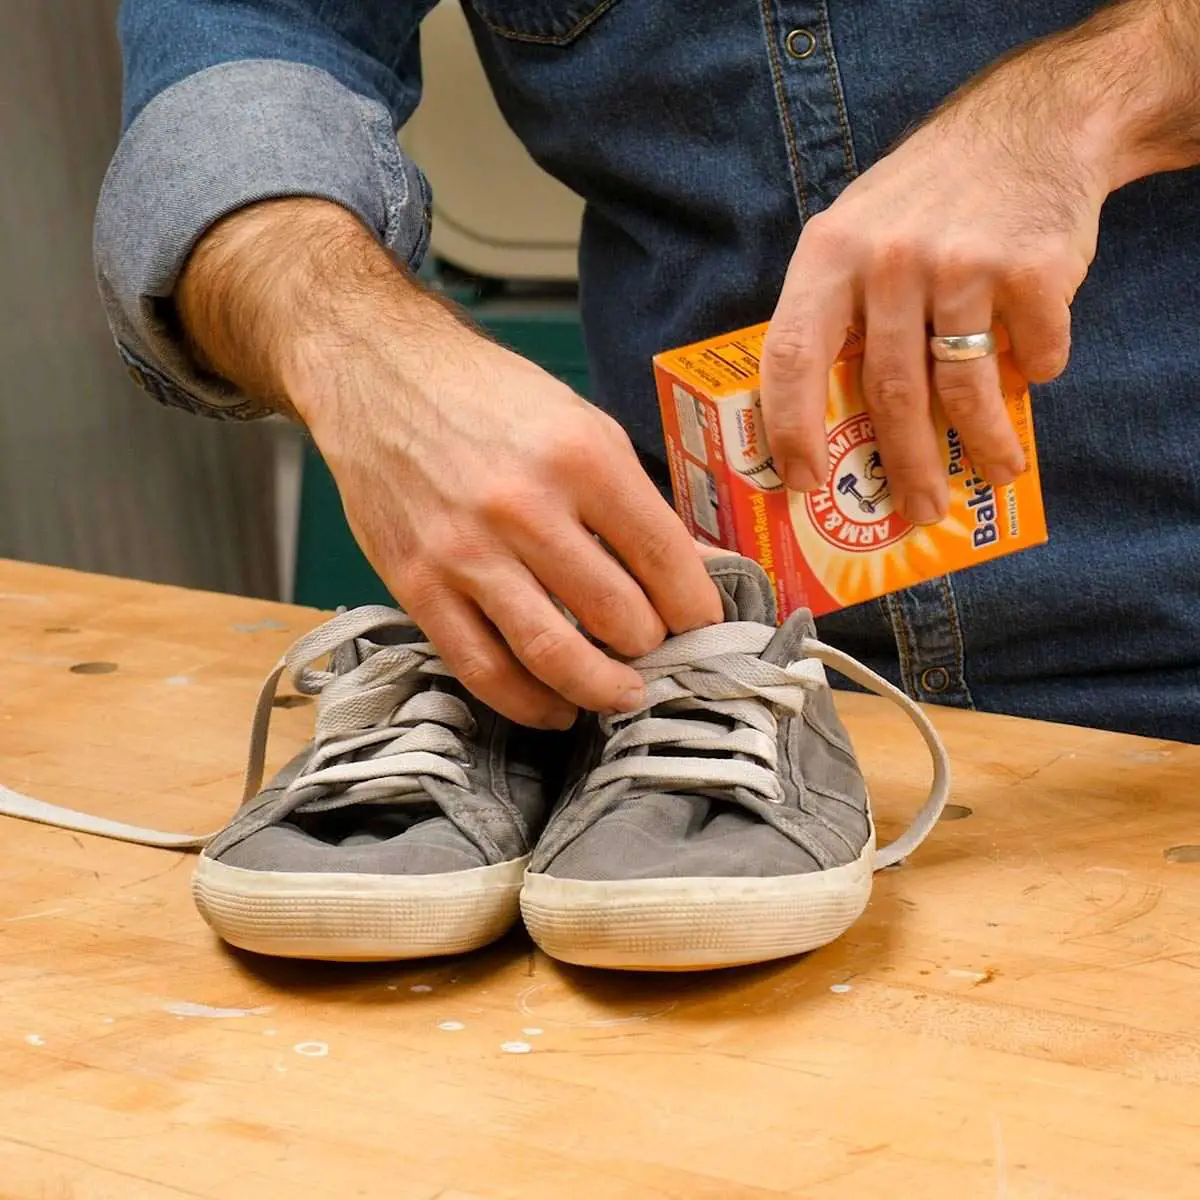 11 Effective Remedies for Smelling Shoes and Feet